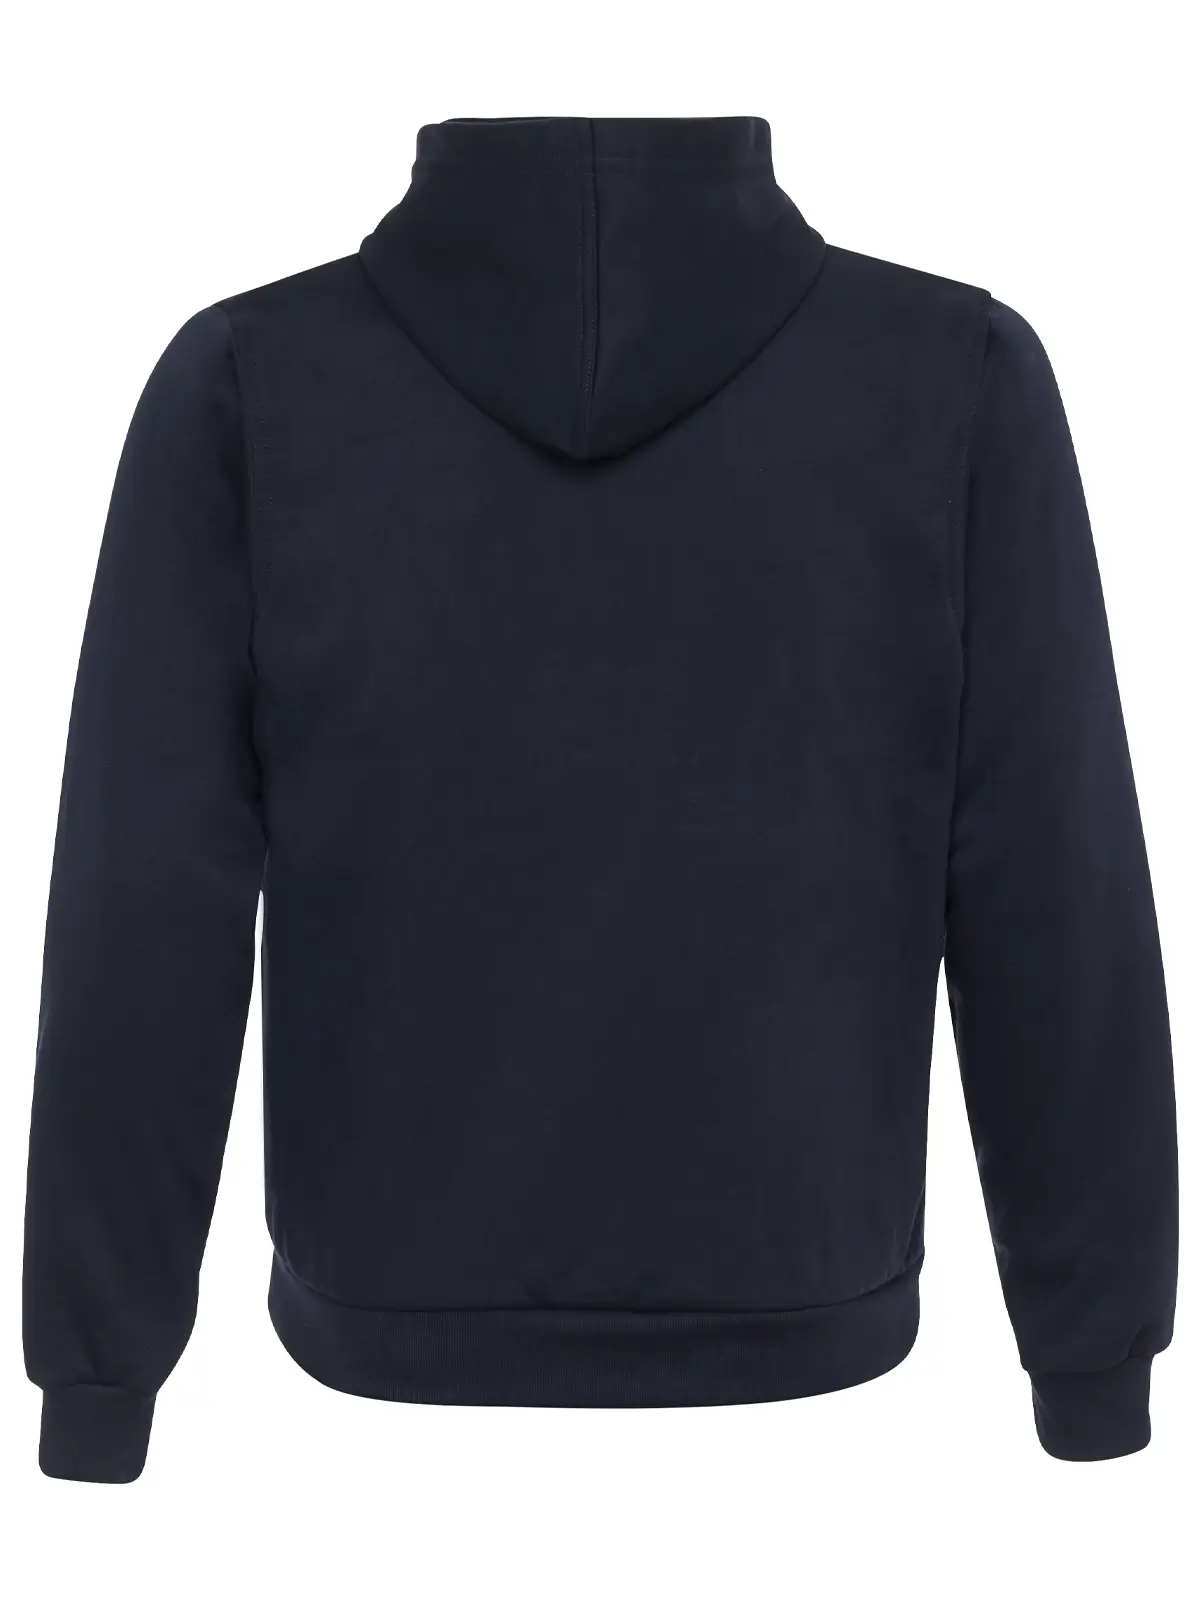 Sweatshirt with zipper and cap rear view